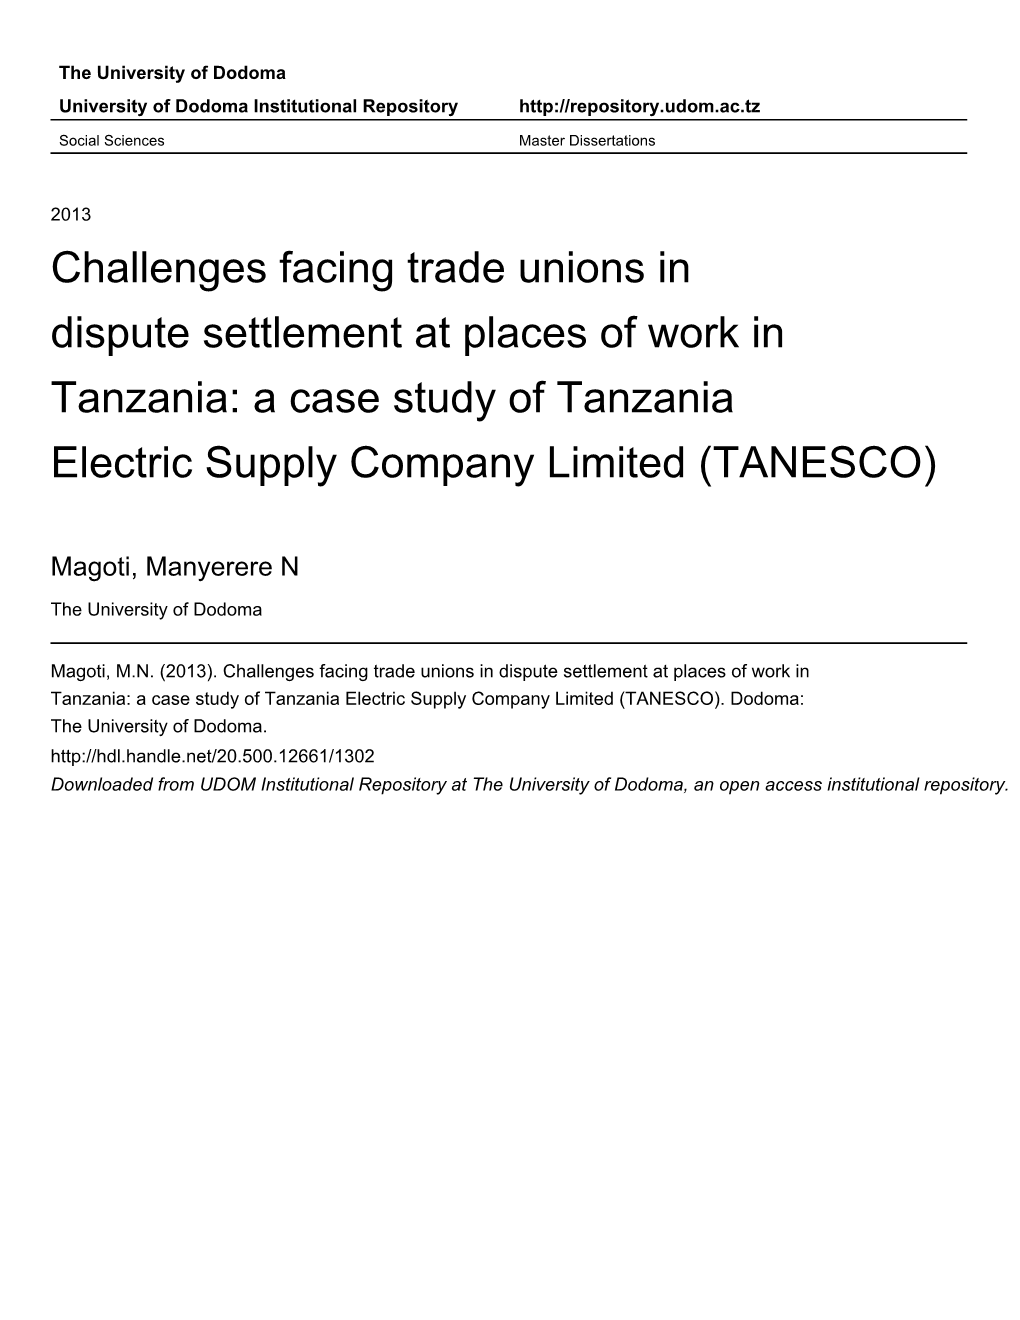 Challenges Facing Trade Unions in Dispute Settlement at Places of Work in Tanzania: a Case Study of Tanzania Electric Supply Company Limited (TANESCO)